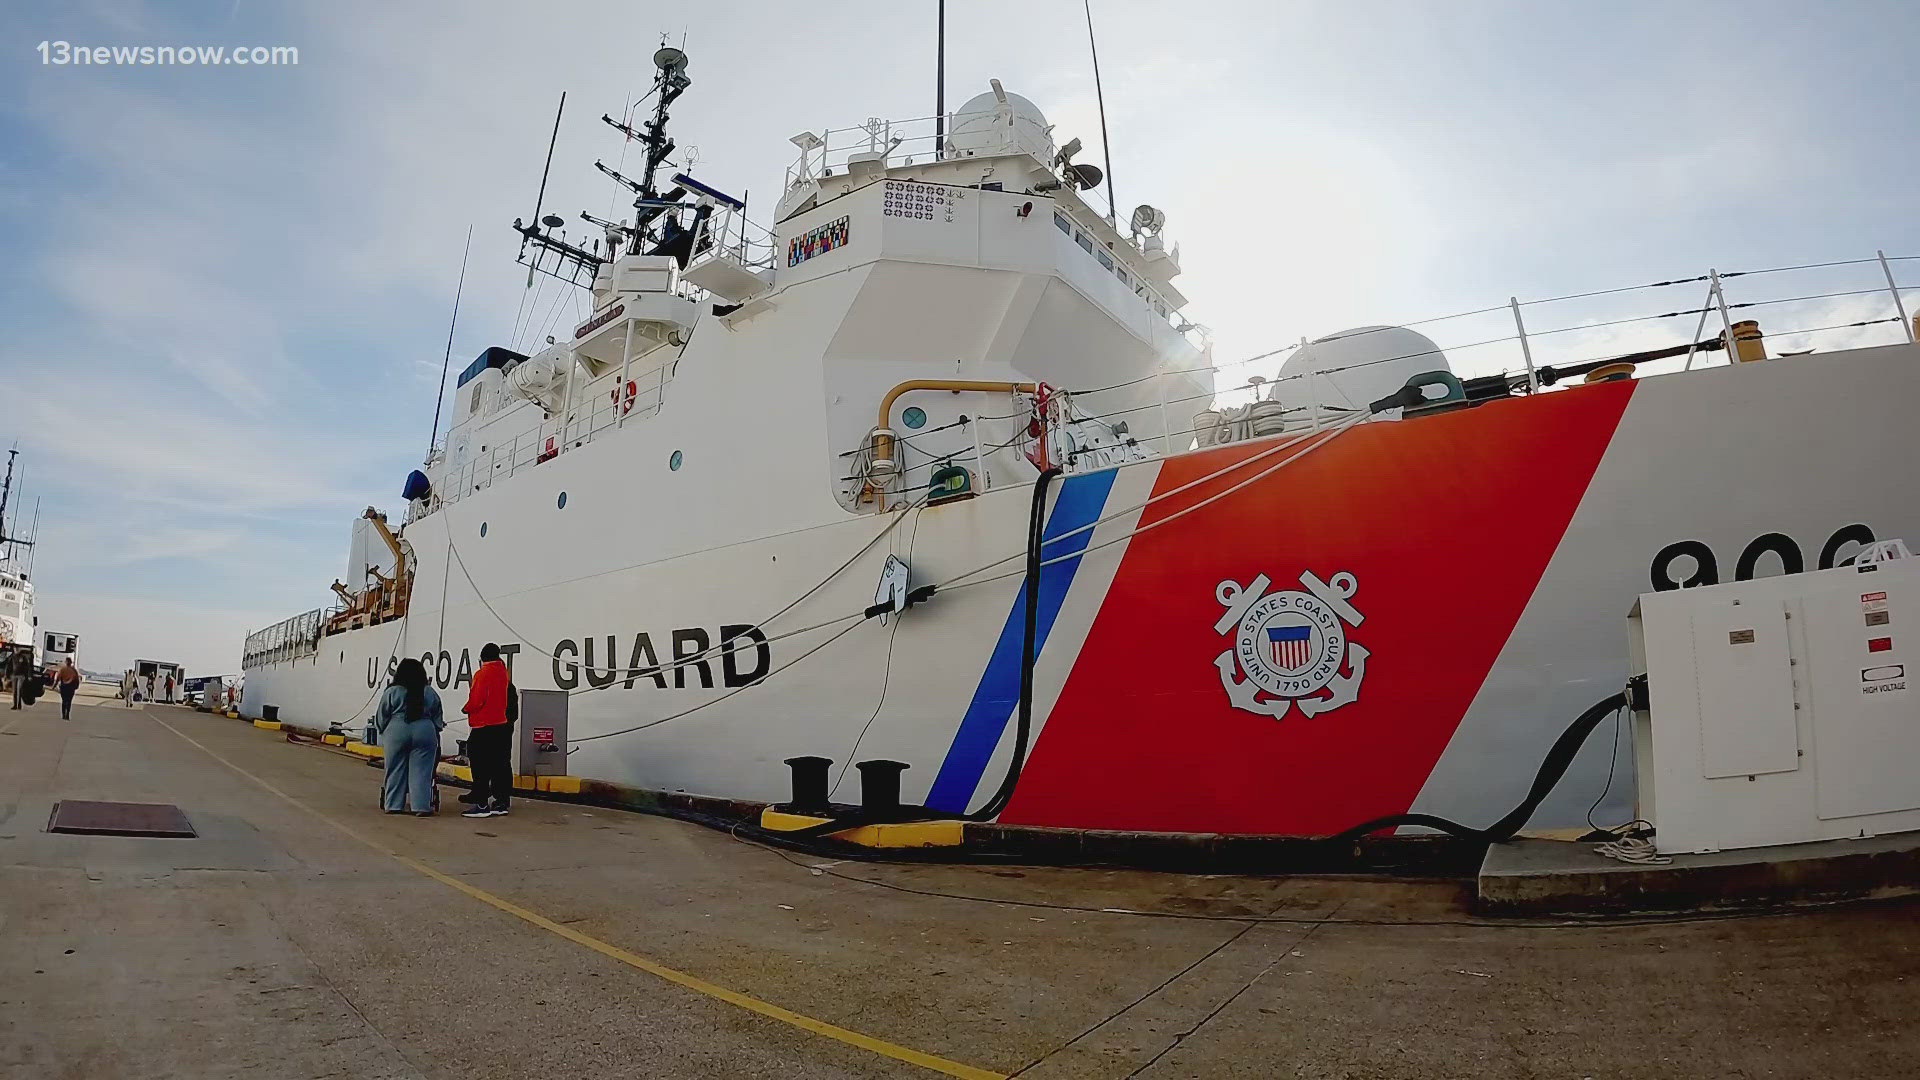 Tonight, the Coast Guard is facing some serious belt-tightening with a 100-million dollar cut, forecast in its Fiscal year 2025 budget.